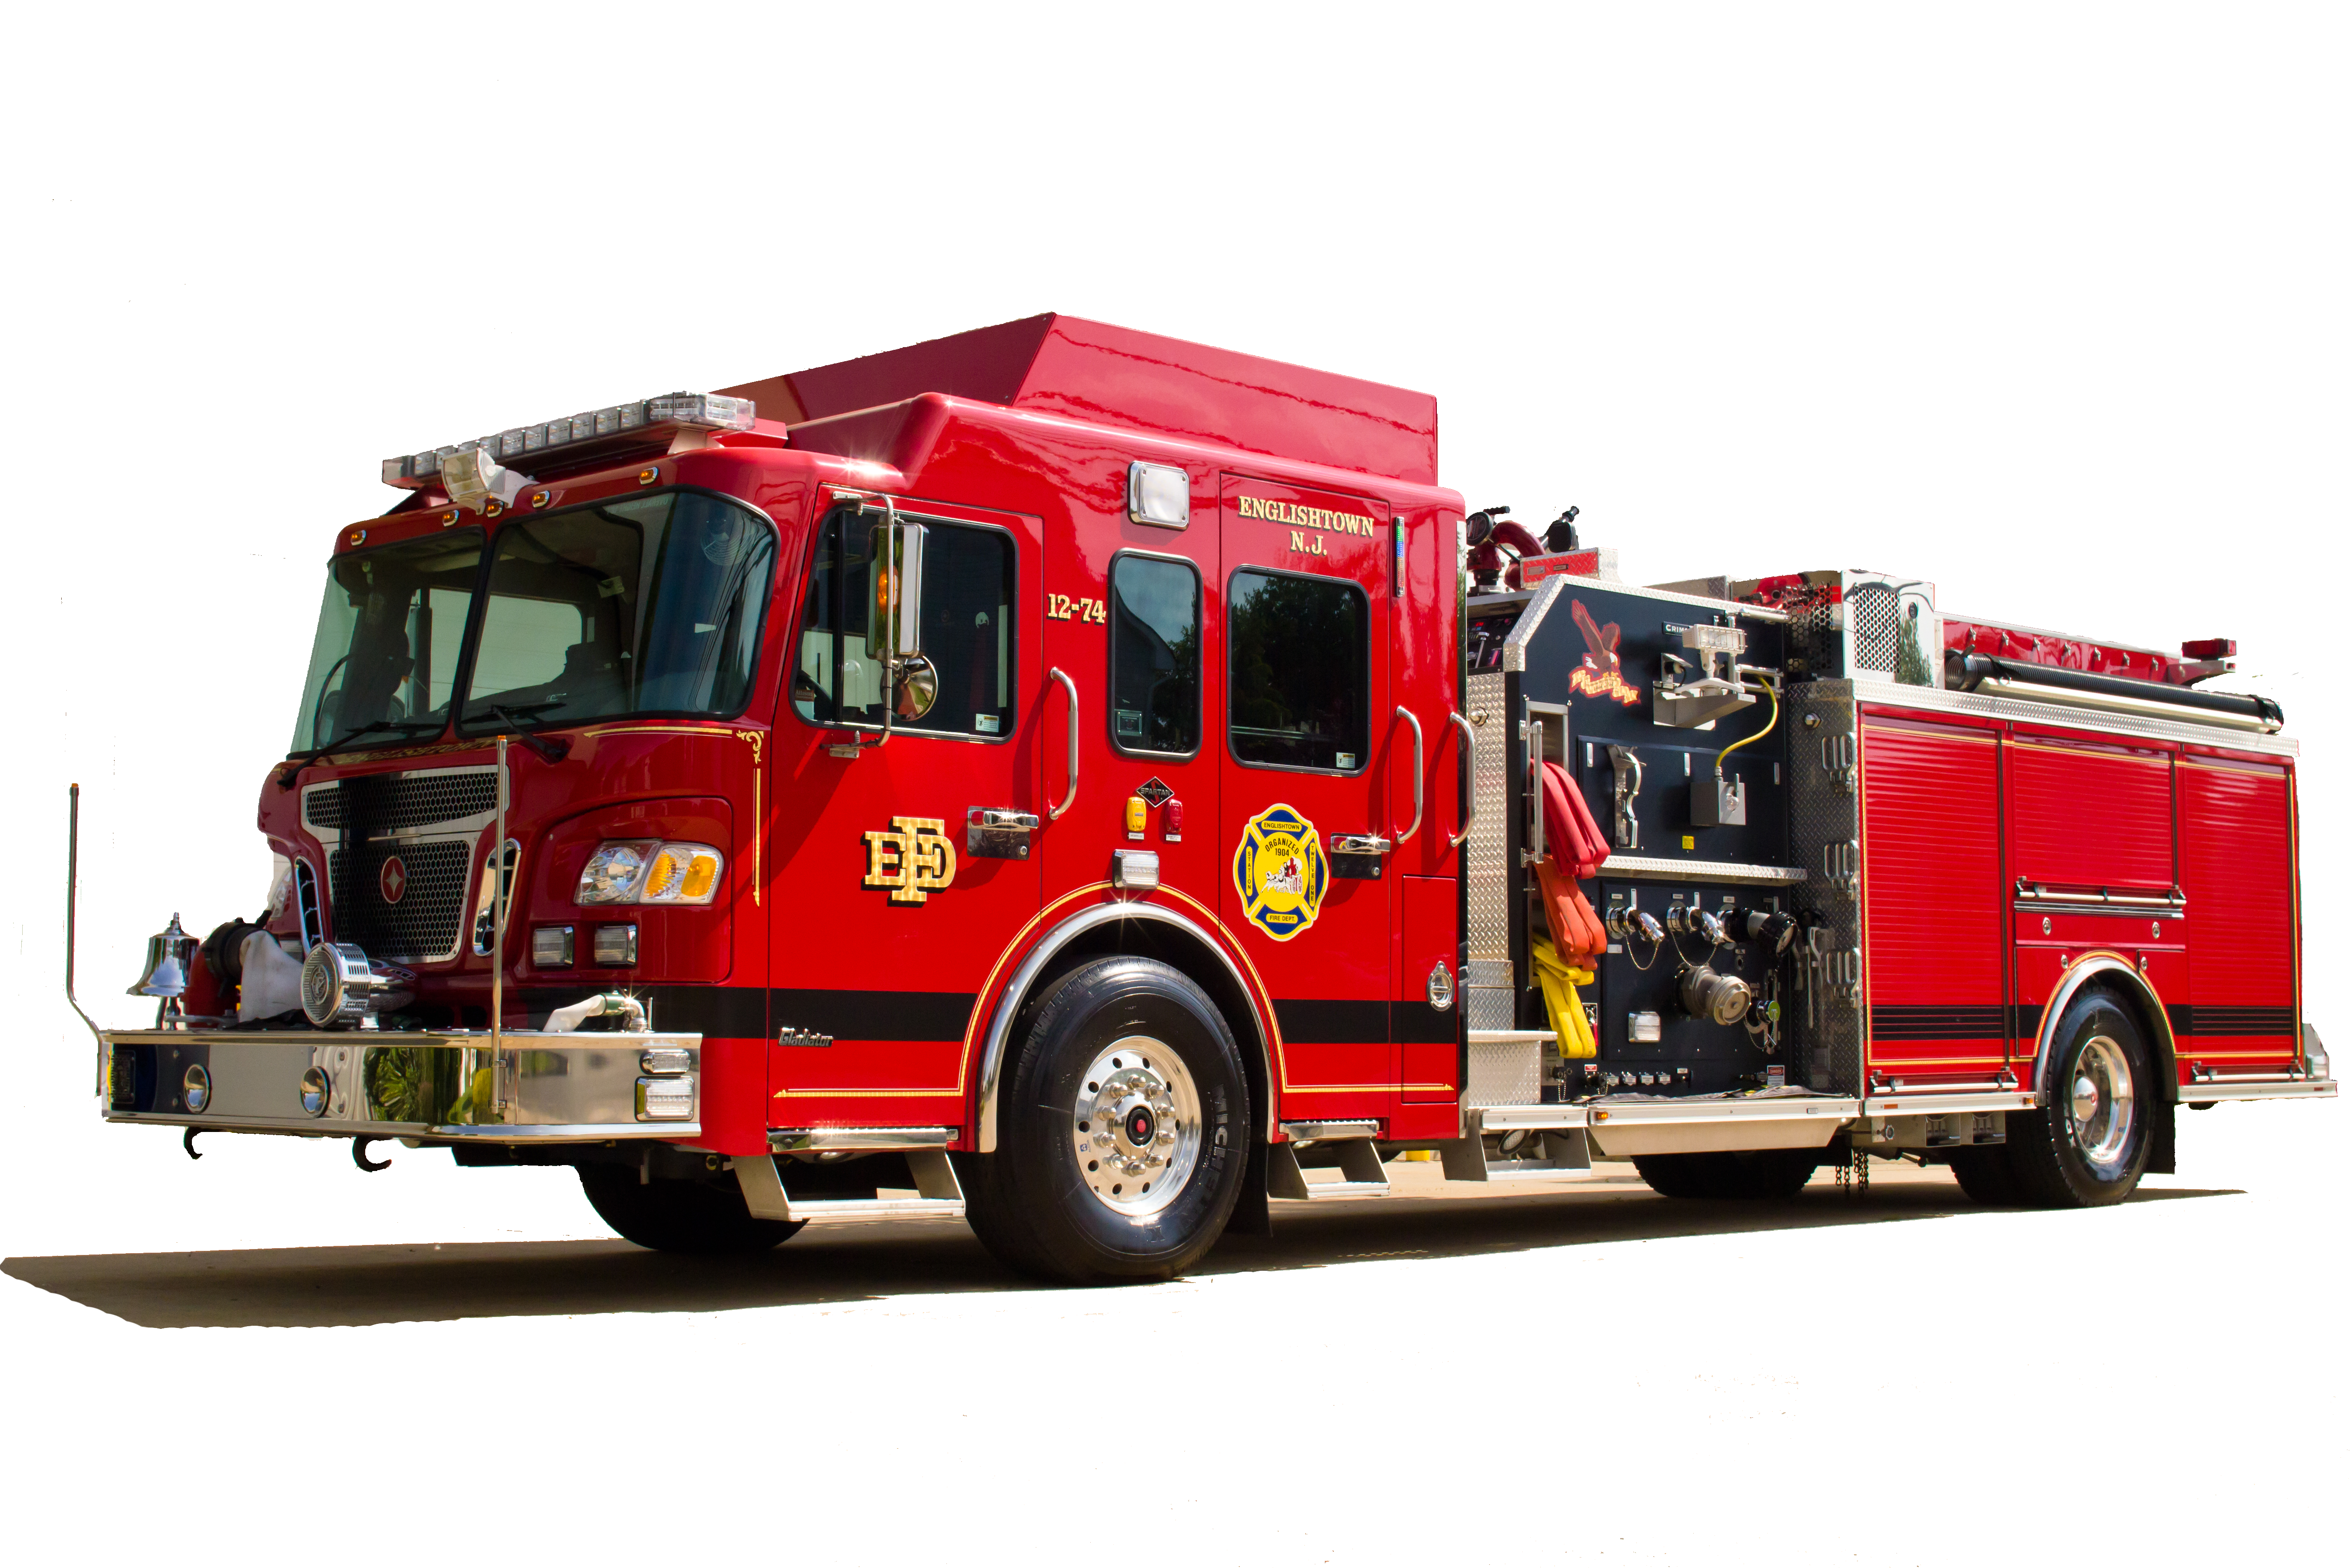 Fire truck PNG images free download, fire engine PNG.